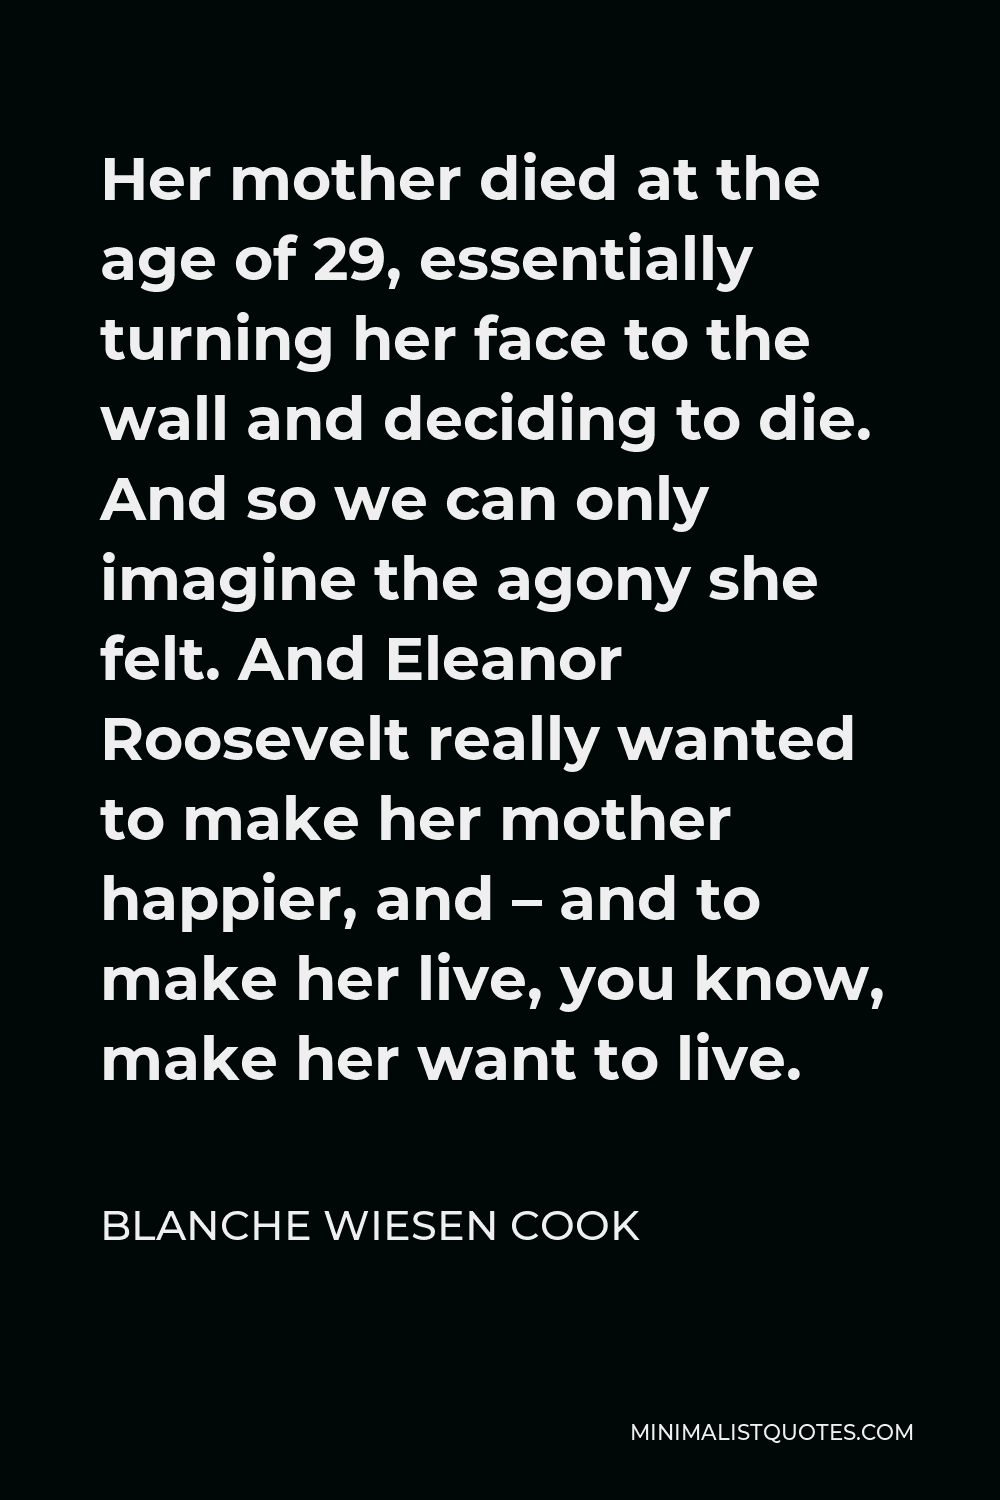 Blanche Wiesen Cook Quote - Her mother died at the age of 29, essentially turning her face to the wall and deciding to die. And so we can only imagine the agony she felt. And Eleanor Roosevelt really wanted to make her mother happier, and – and to make her live, you know, make her want to live.